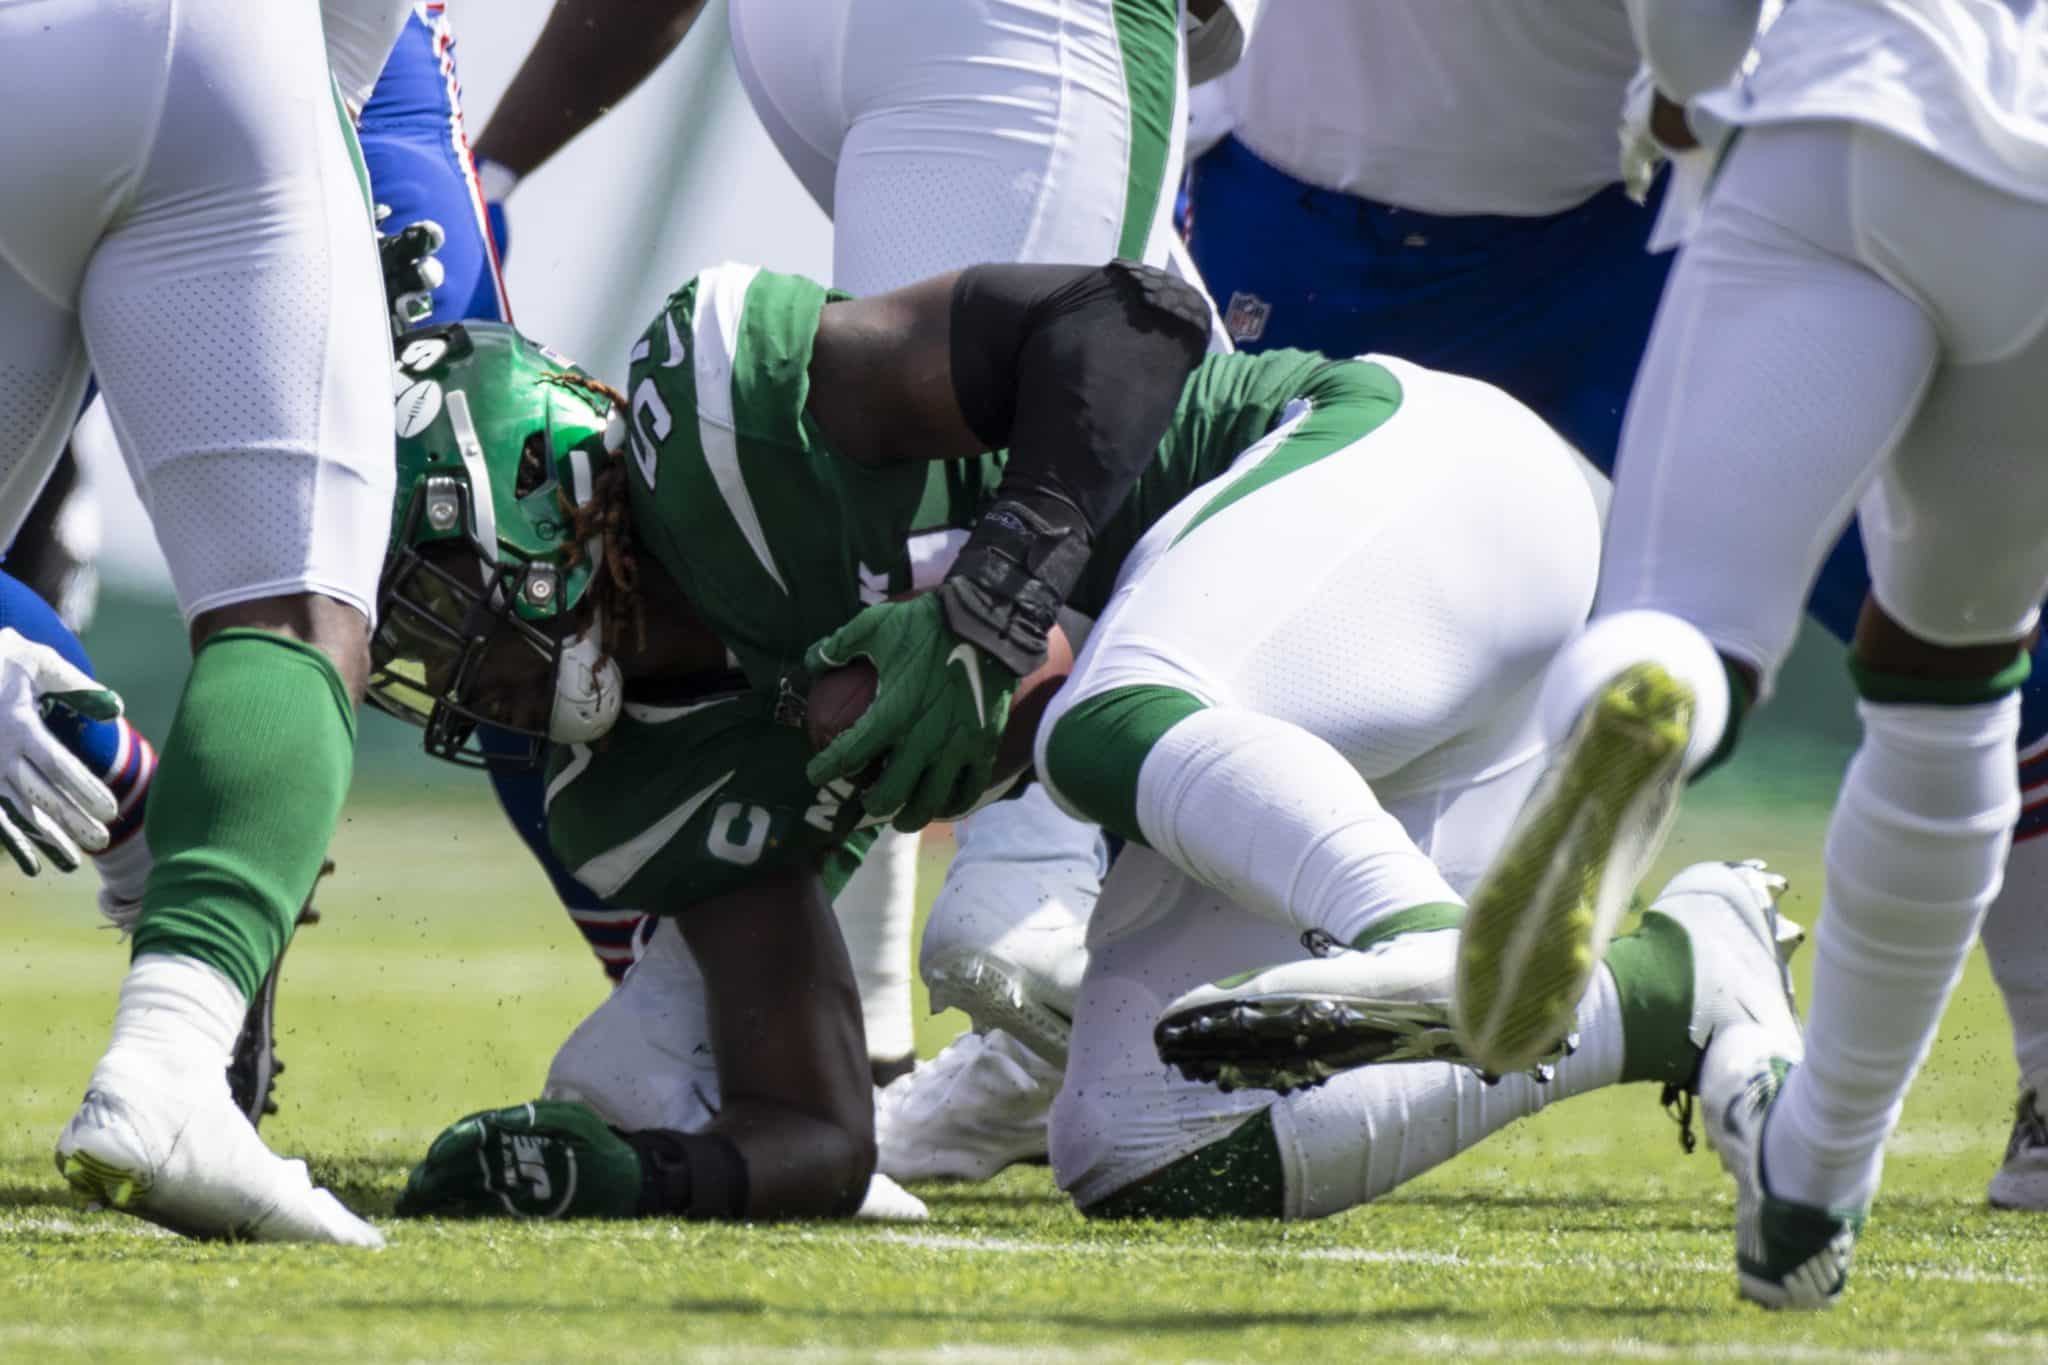 EAST RUTHERFORD, NJ - SEPTEMBER 08: C.J. Mosley #57 of the New York Jets picks up a fumbled snap by the Buffalo Bills during the second quarter at MetLife Stadium on September 8, 2019 in East Rutherford, New Jersey.